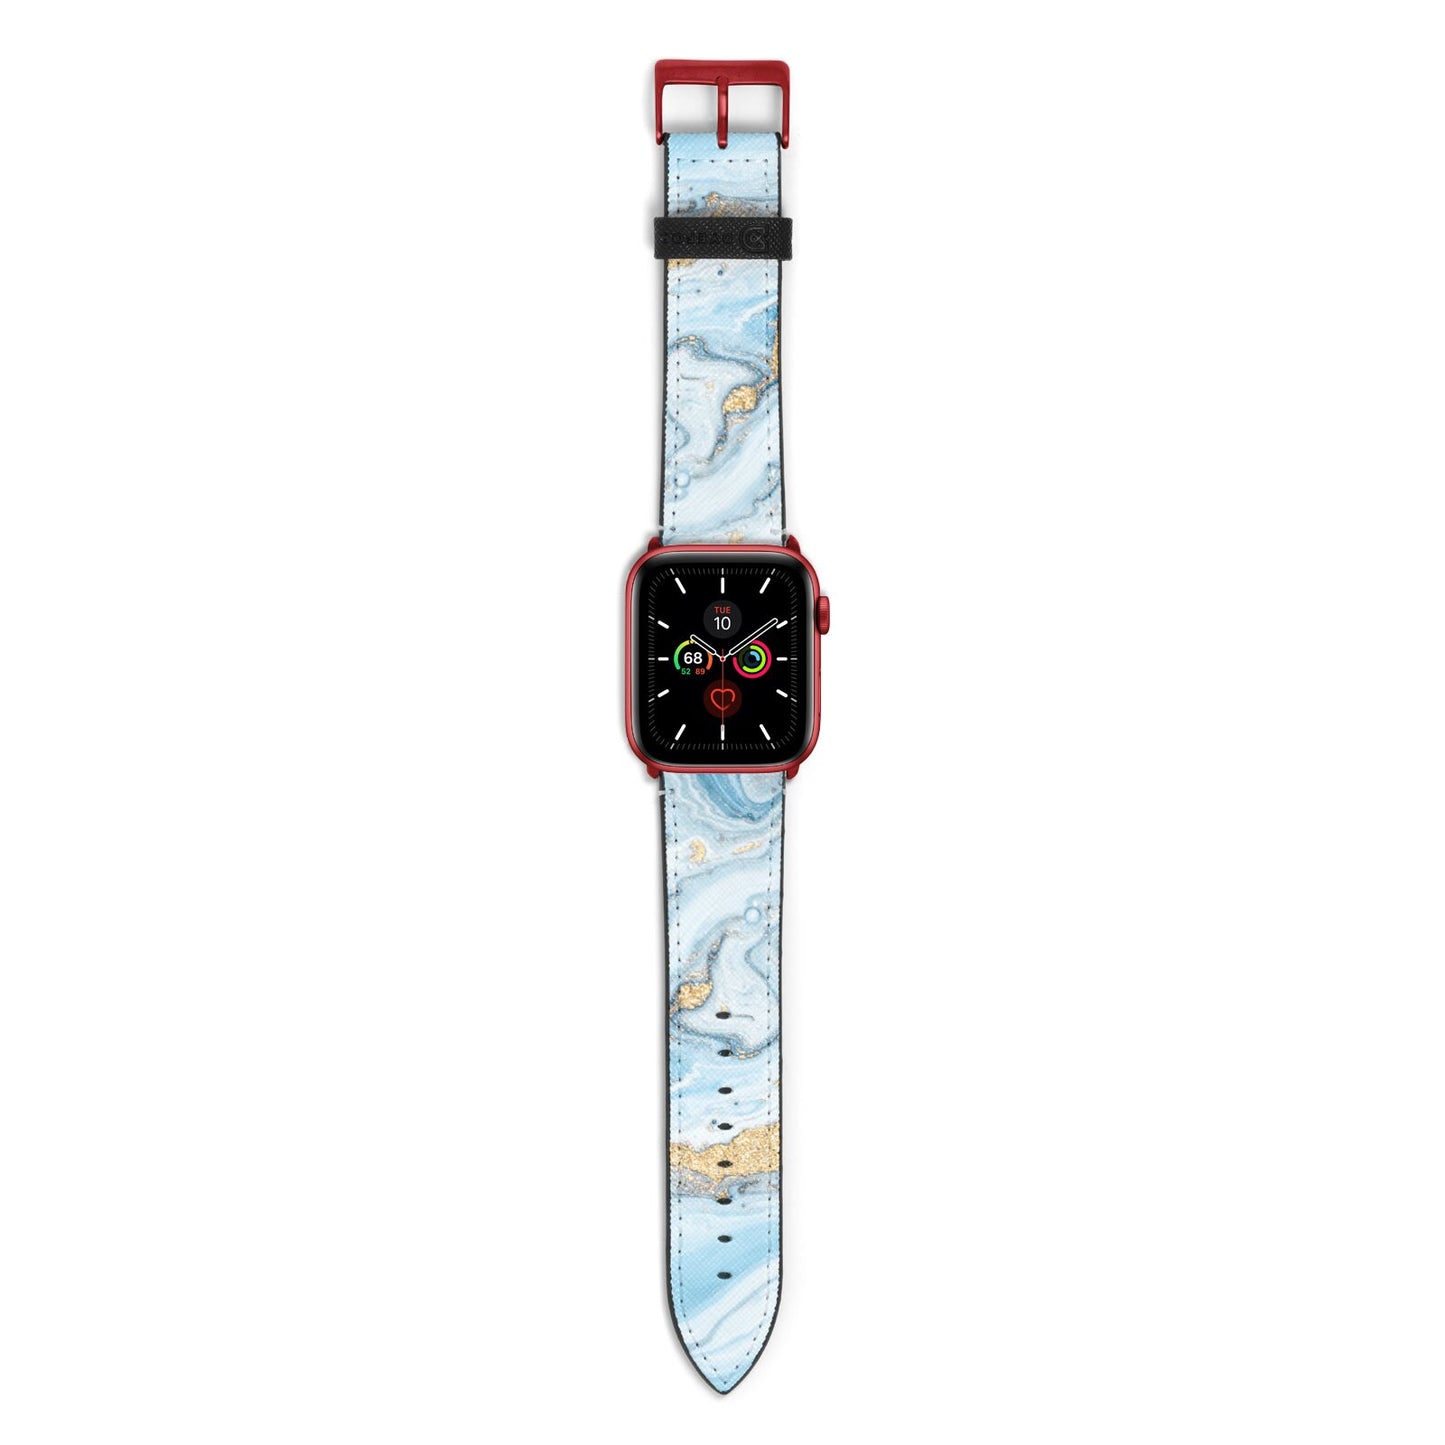 Marble Apple Watch Strap with Red Hardware